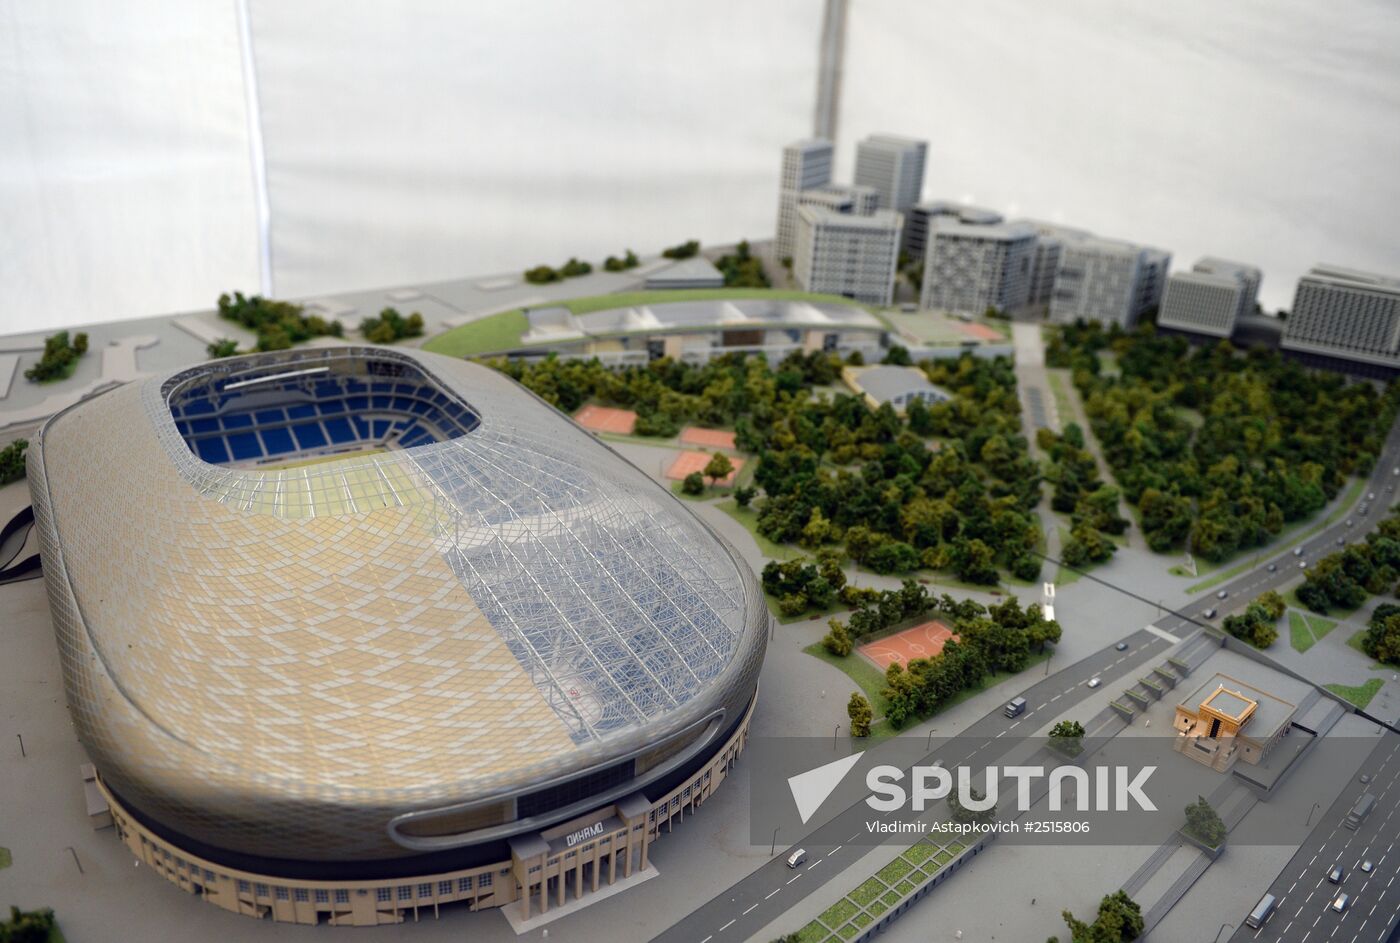 Laying memorable capsule at VTB Arena stadium in Moscow